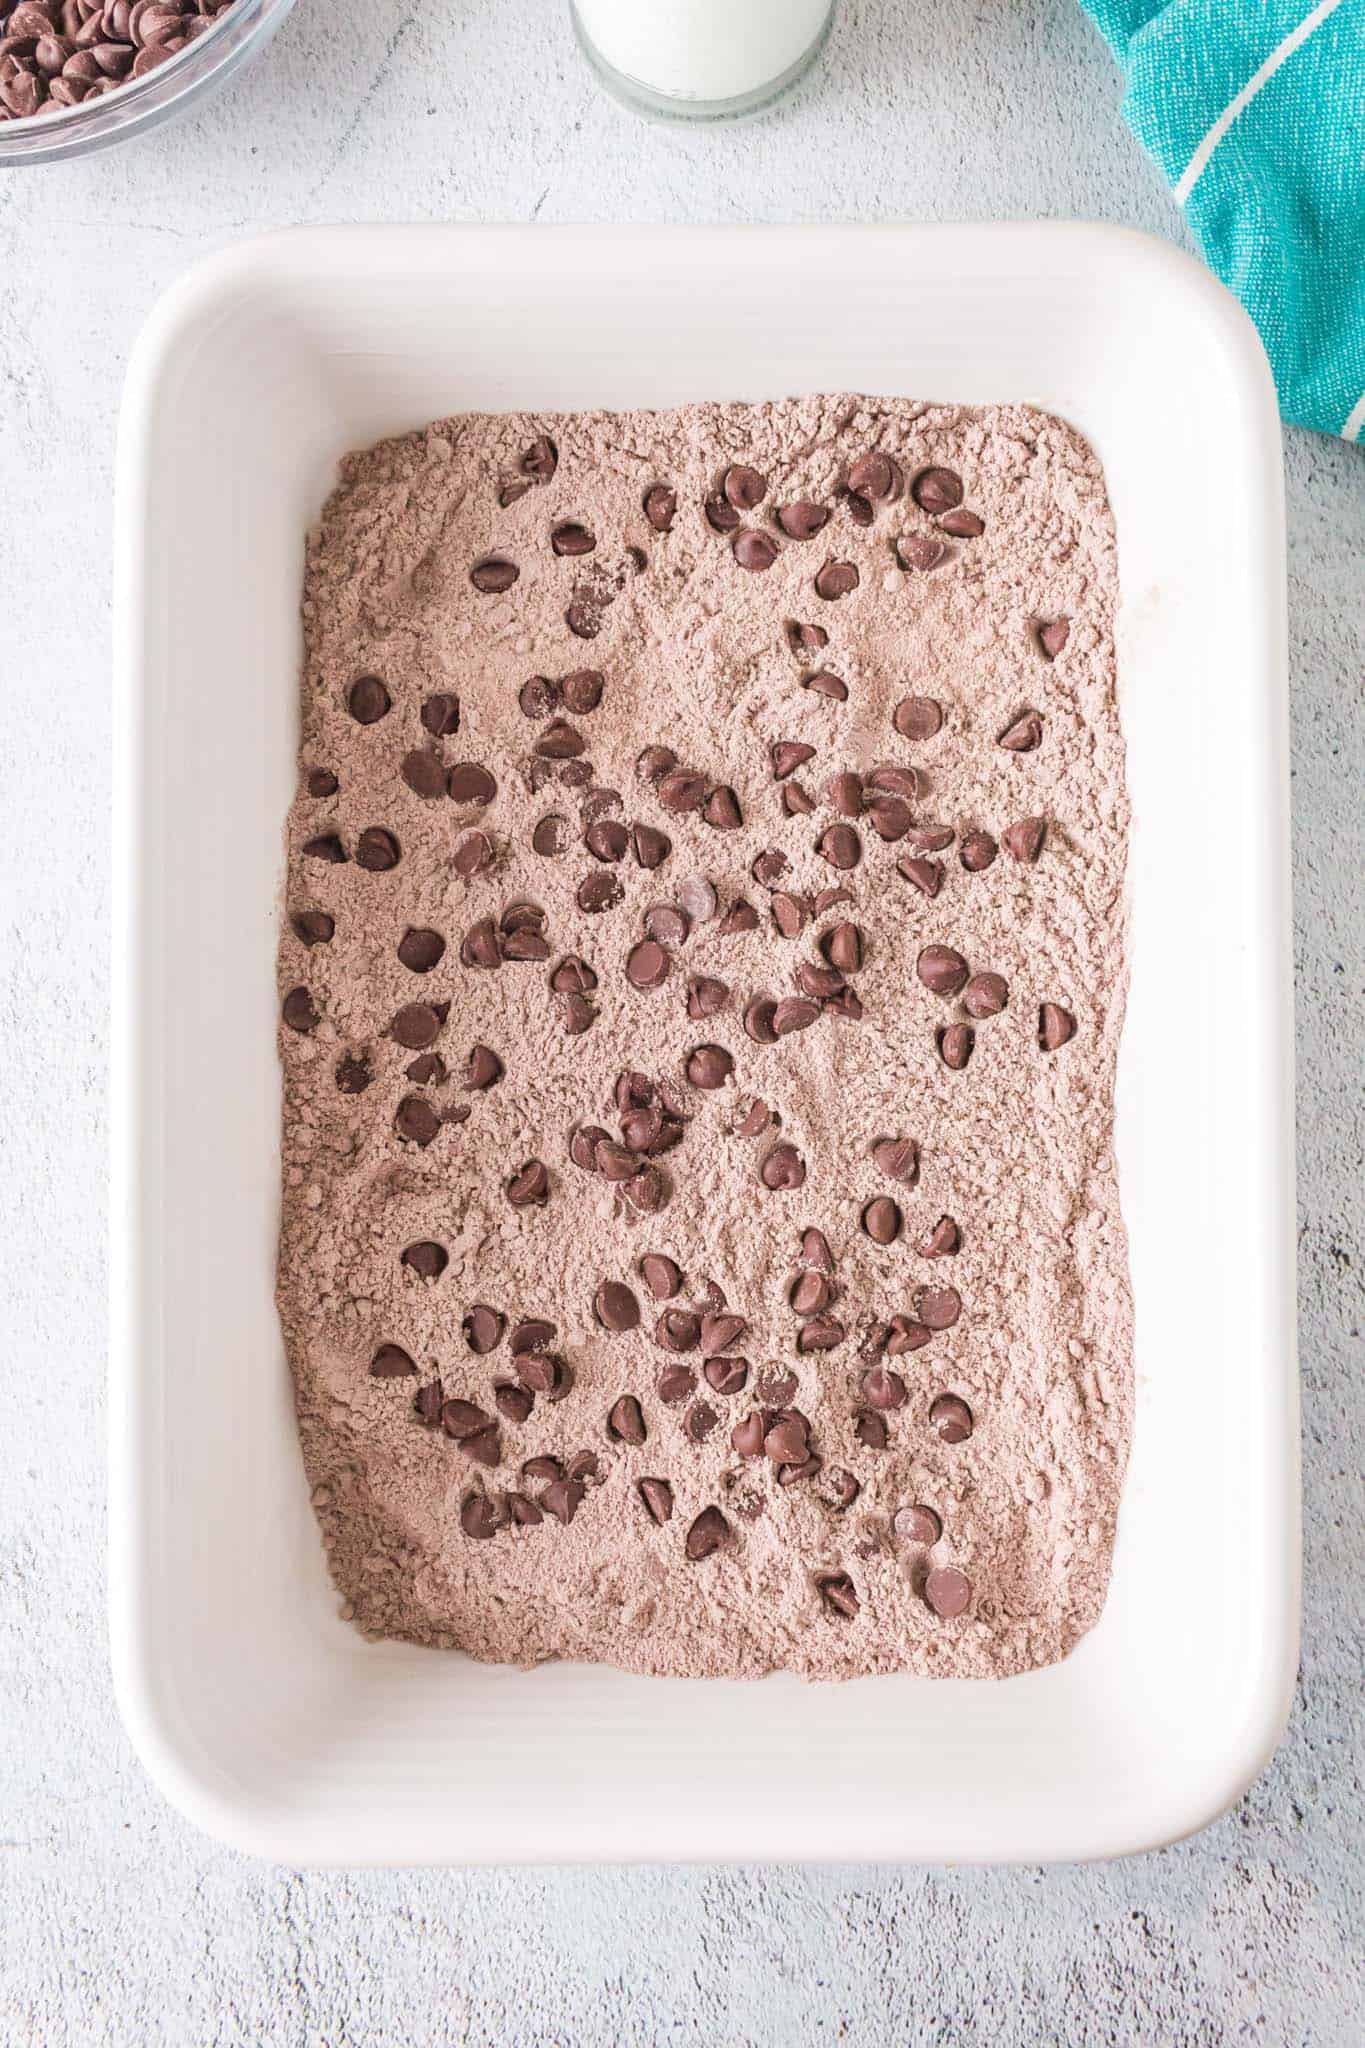 chocolate chips on top of dry chocolate cake mix and pudding mix in a baking dish